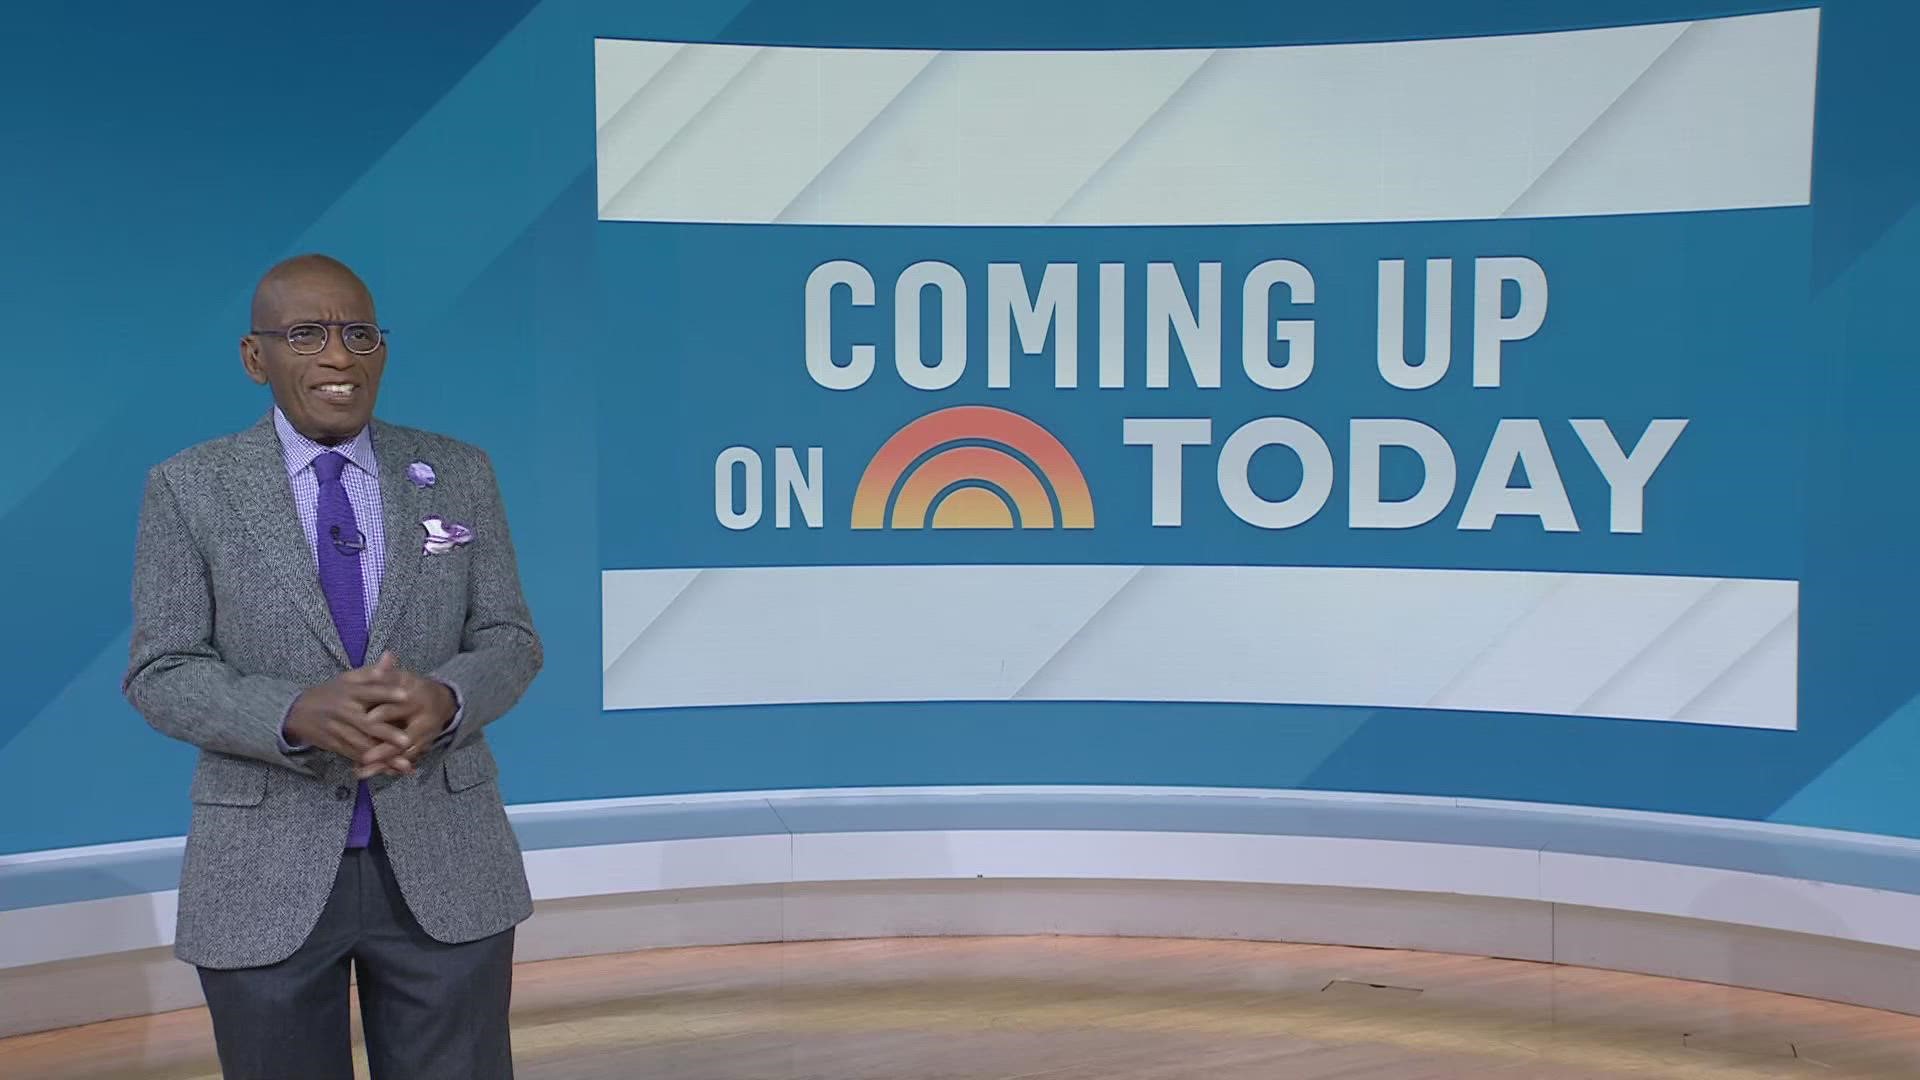 He's back! Our friend Al Roker from the TODAY show joined us on GO! once again.